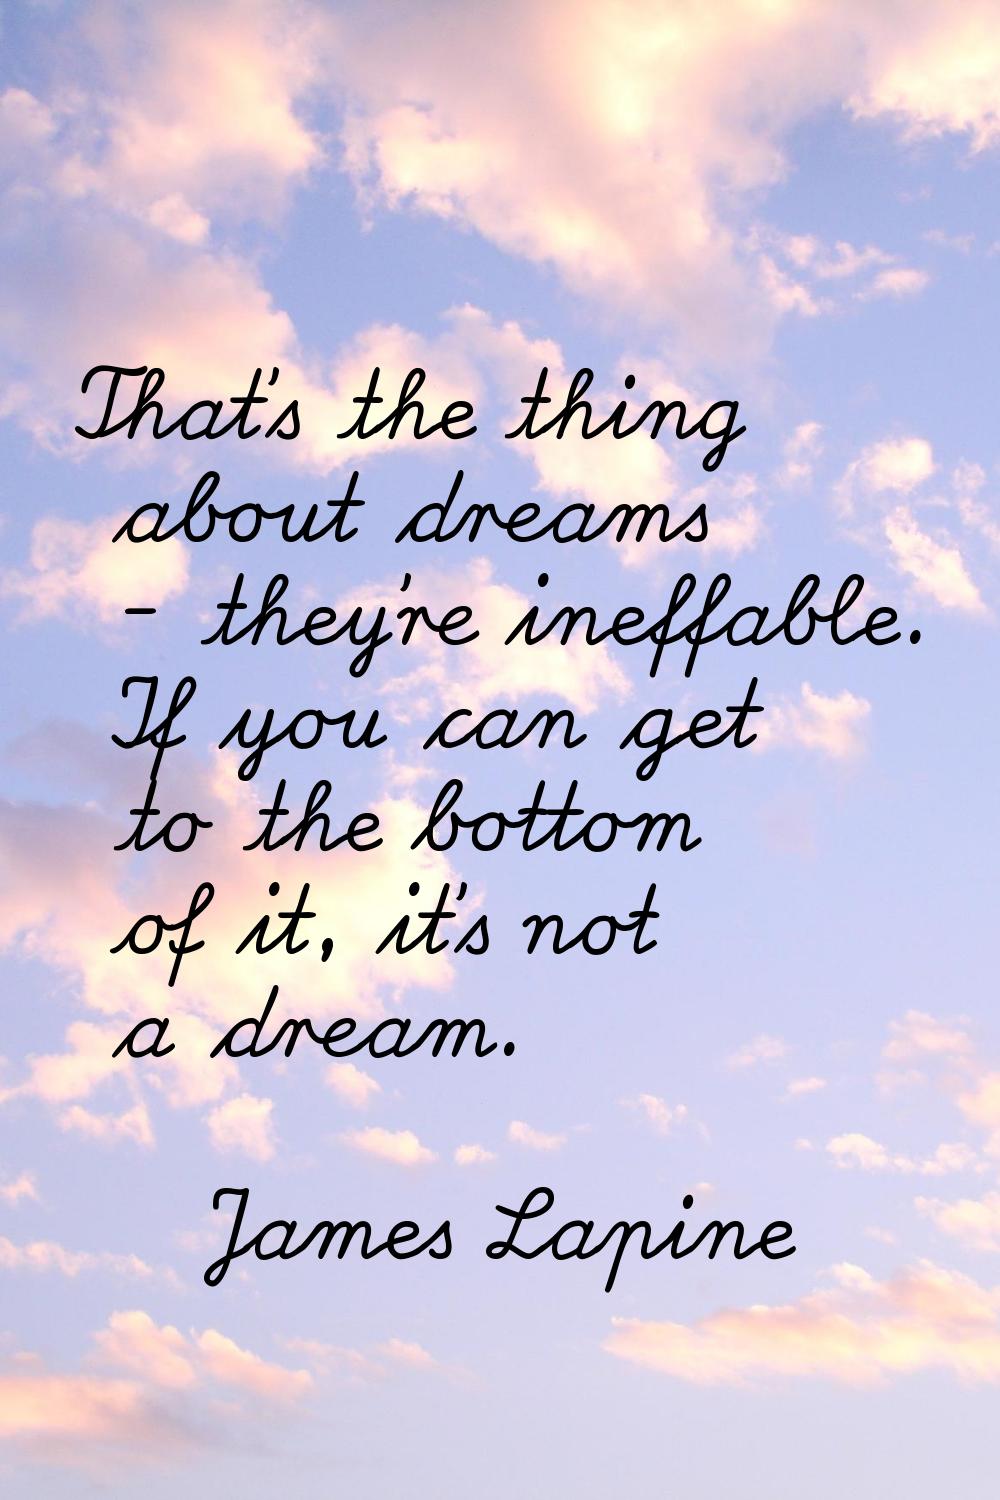 That's the thing about dreams - they're ineffable. If you can get to the bottom of it, it's not a d